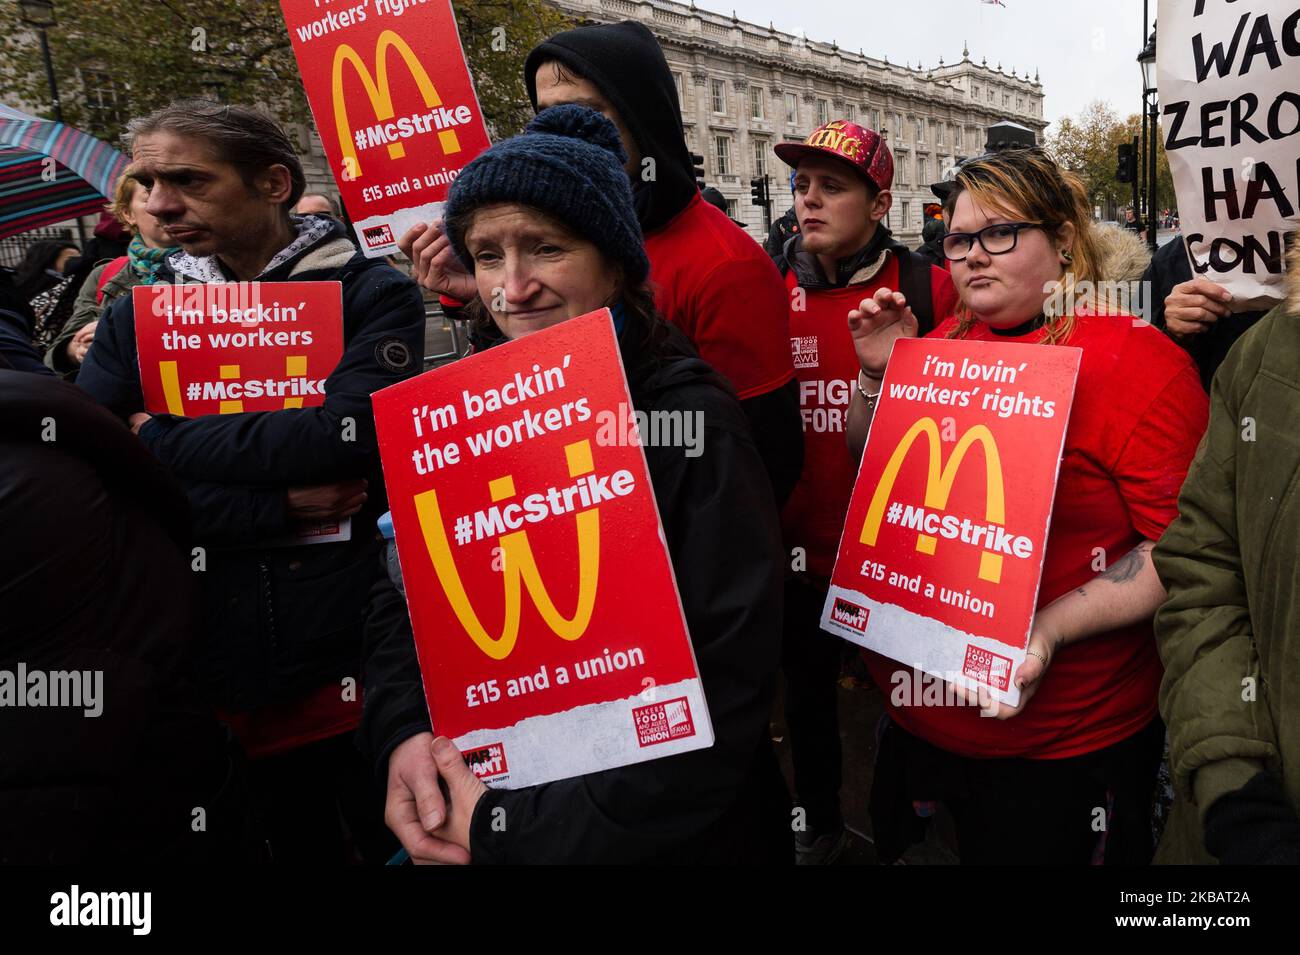 McDonald's employees, trade unionists and campaigners for fast food workers' rights gather outside Downing Street for a rally on 12 November, 2019 in London, England. Members of the Bakers, Food and Allied Workers Union (BFAWU) walked out of six McDonald's stores in London today over a ?15 an hour minimum wage, choice of guaranteed working hours and union rights. (Photo by WIktor Szymanowicz/NurPhoto) Stock Photo